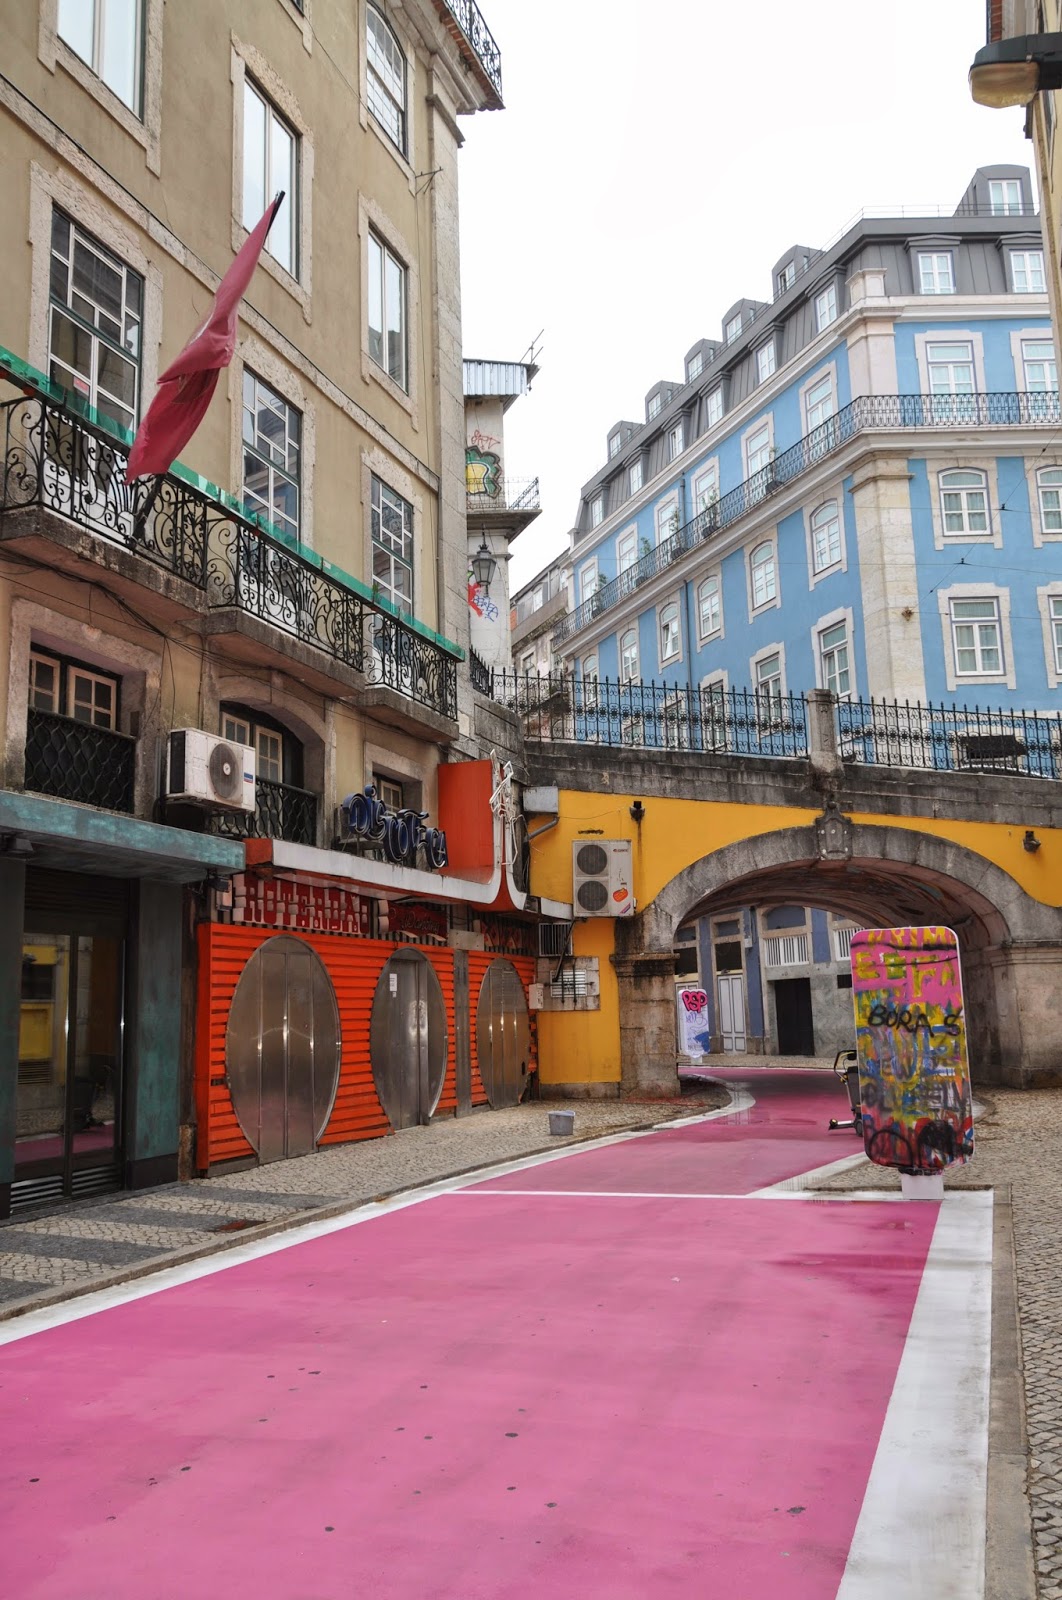 iolanda andrade: The pink street in Cais do Sodré area, Lisbon - The 26th of October 2013